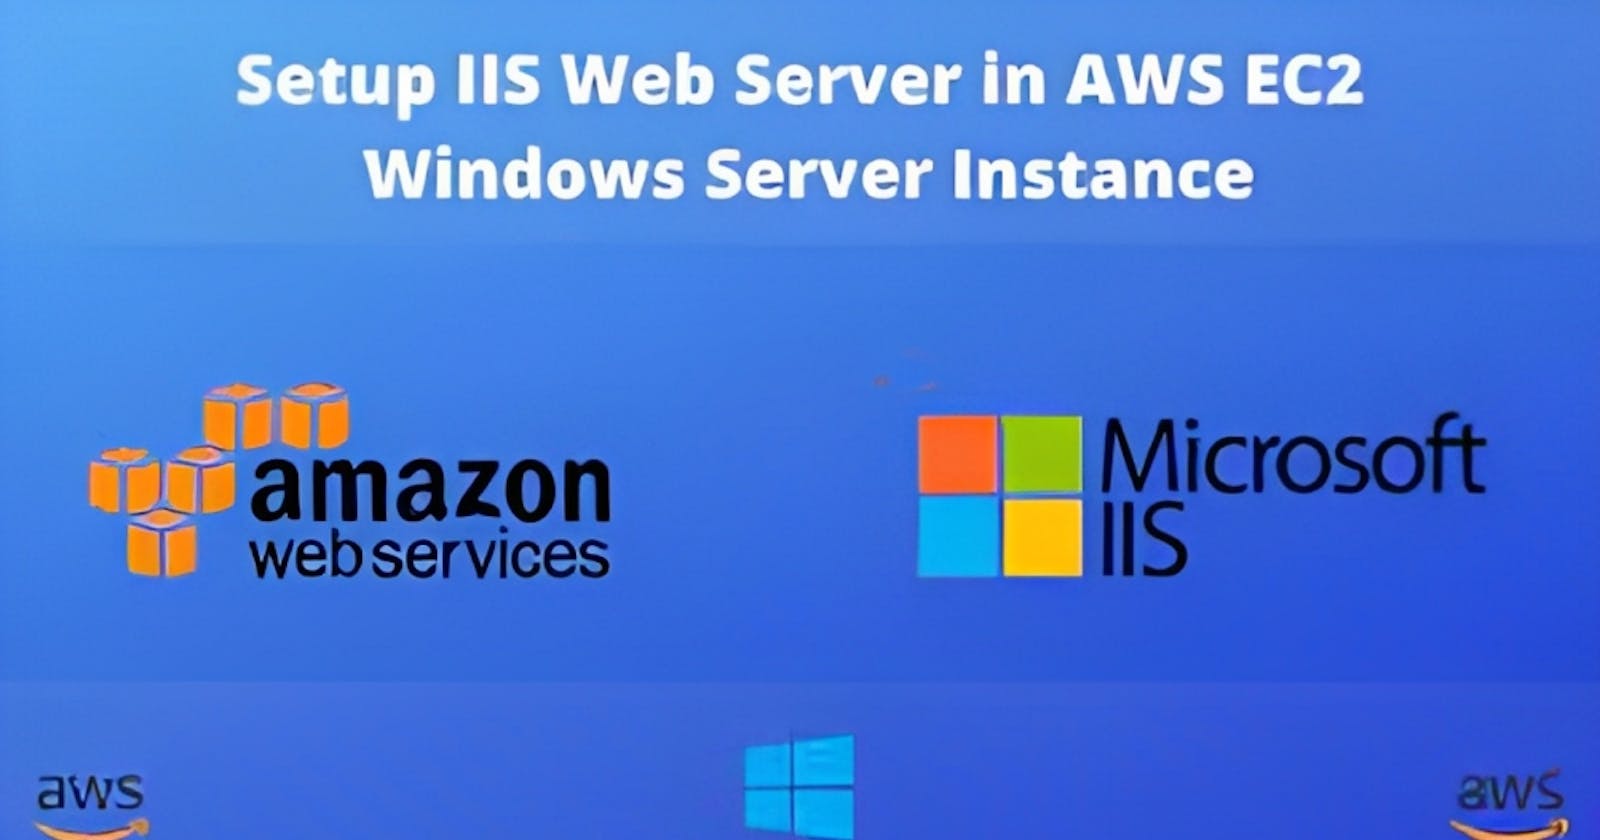 "Step-by-Step Guide to Creating a Windows Server on AWS and Installing IIS to Host Your Website"